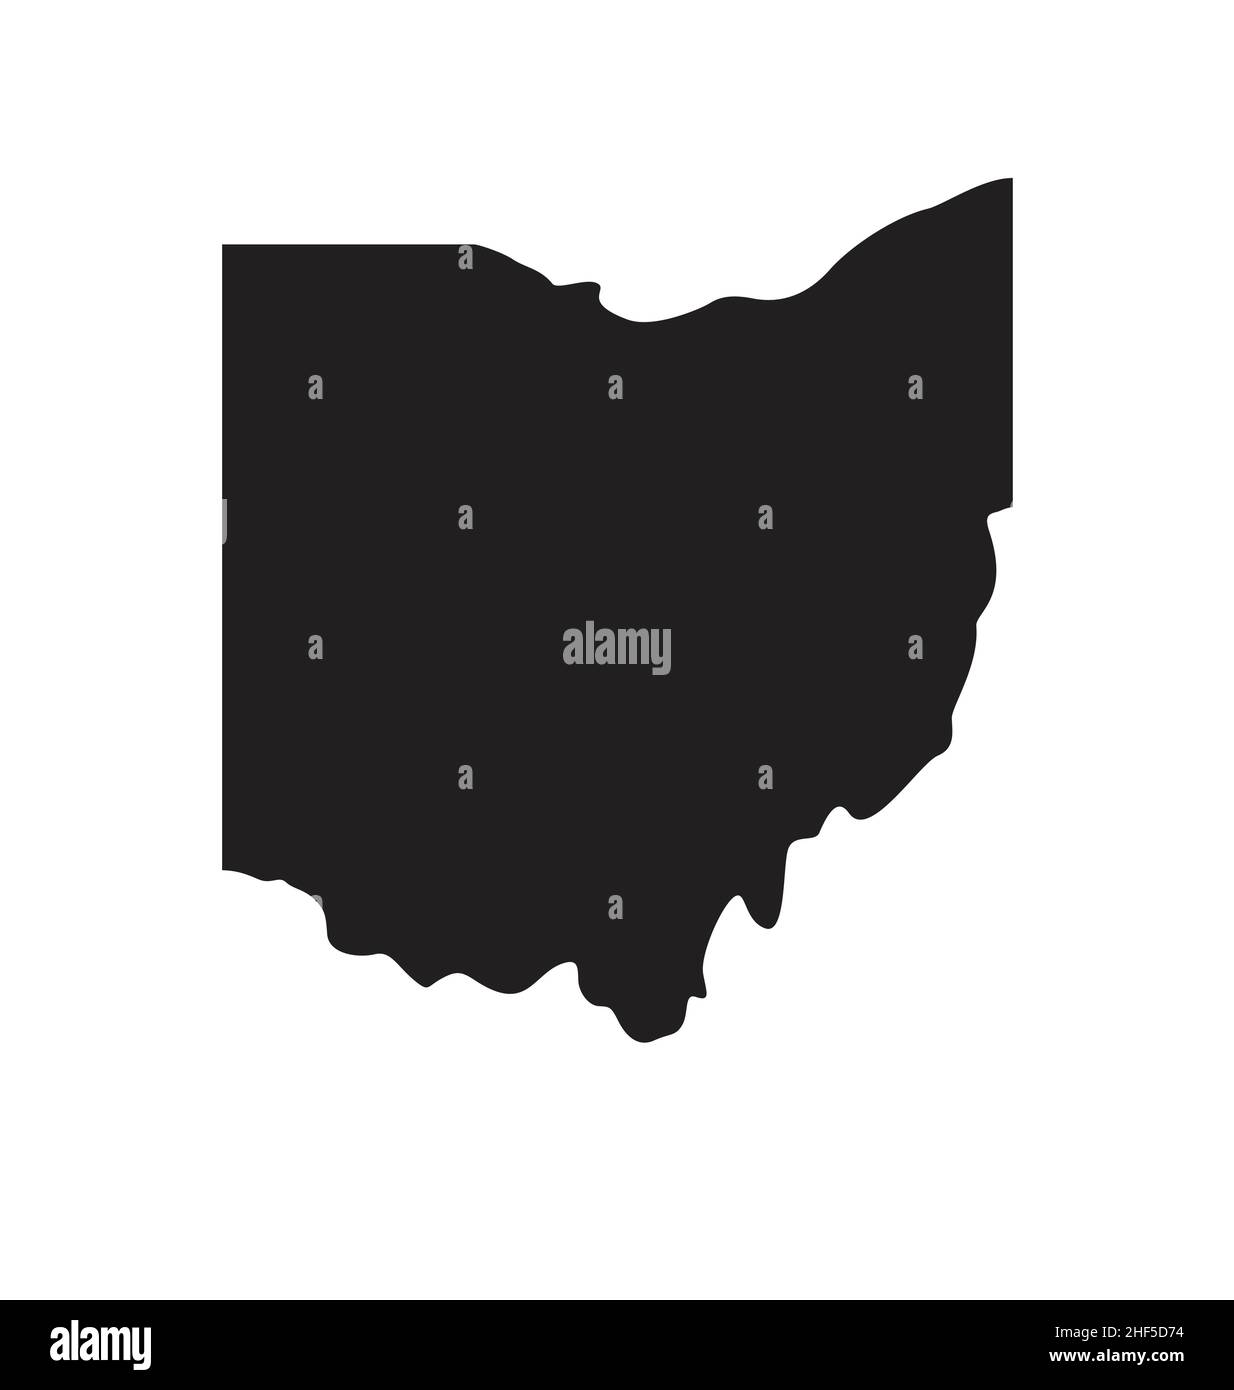 ohio oh state map shape silhouette simplified vector isolated on white background Stock Vector